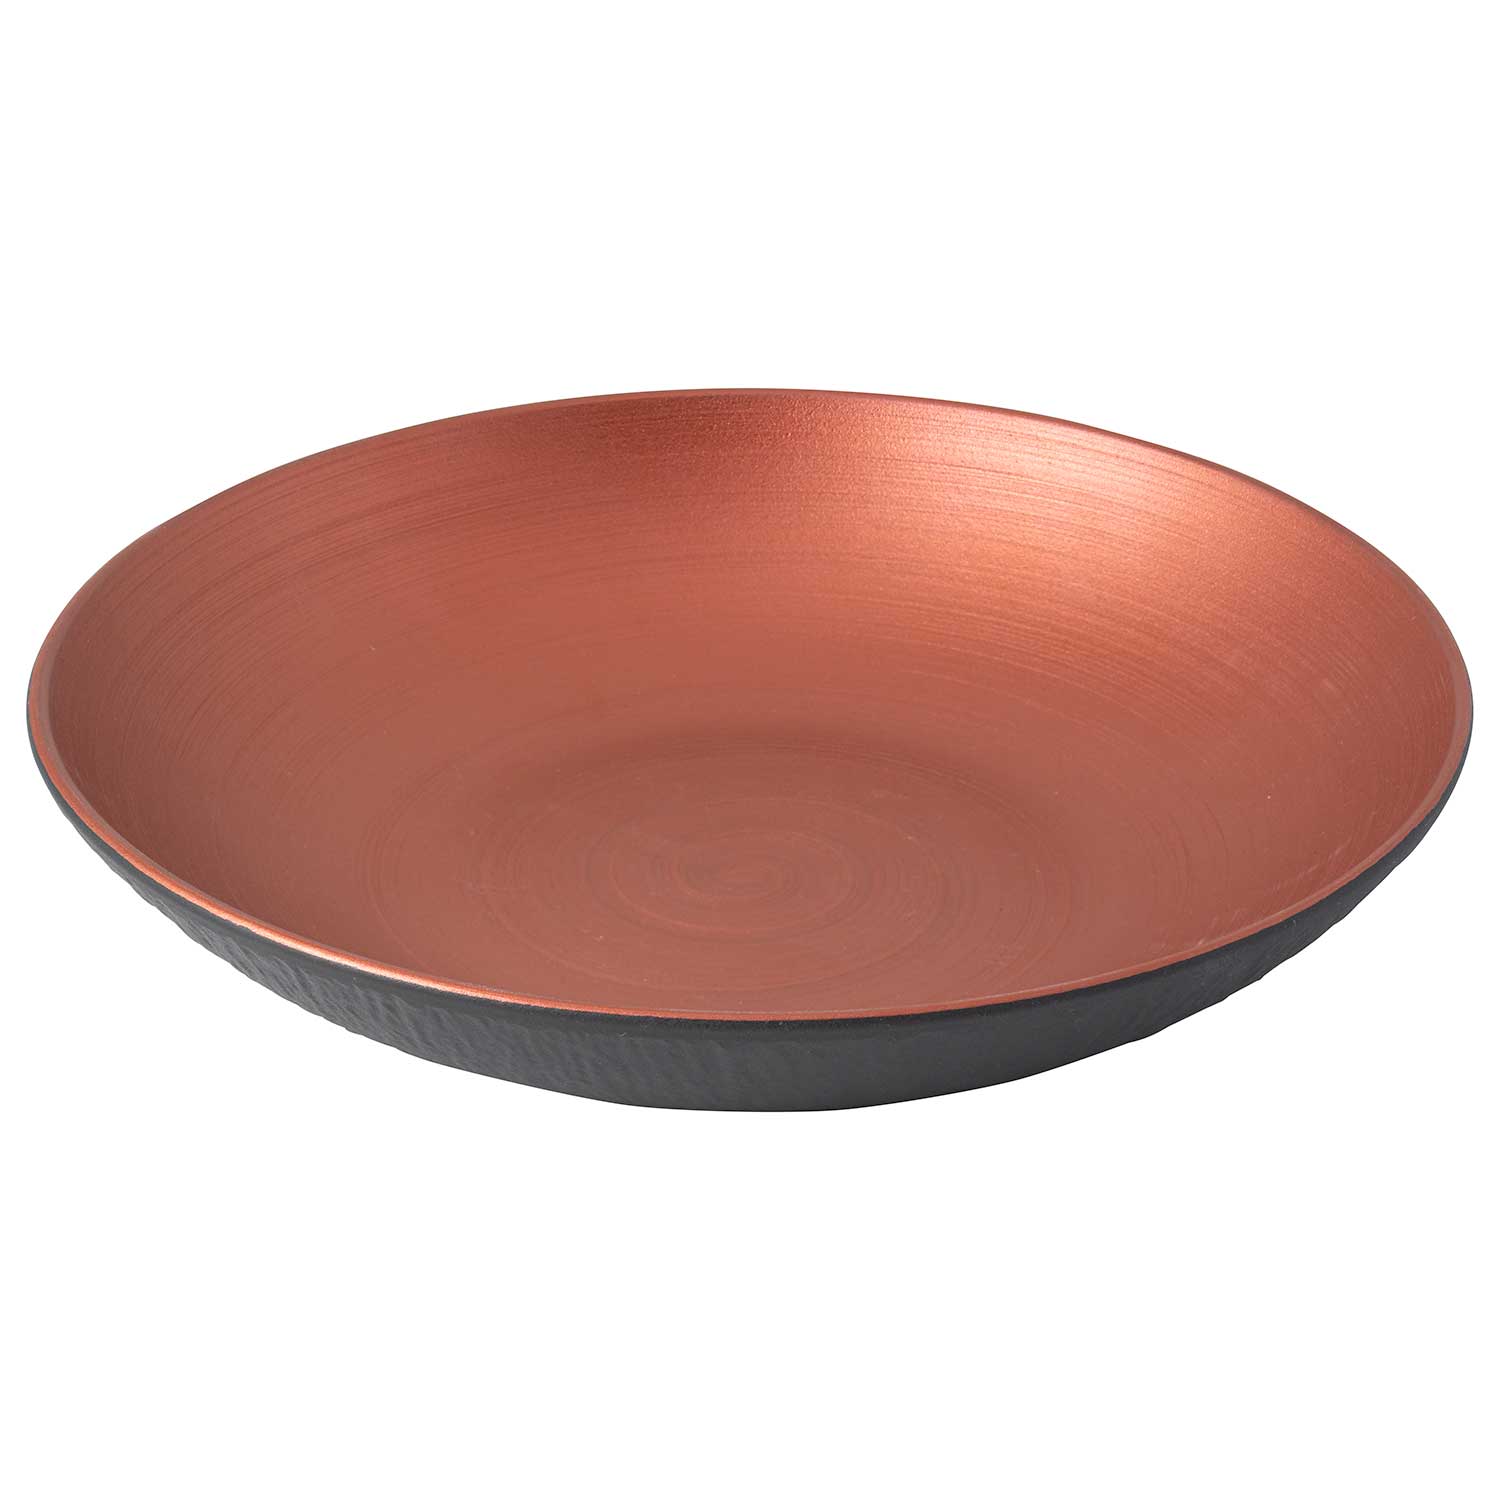 Dishwasher Safe Elegant Dish Maoffrom Premium Porcelain in a Refreshing Combination of Copper and Black Villeroy & Boch 10-4283-1900 Manufacture Rock Glow Bowl